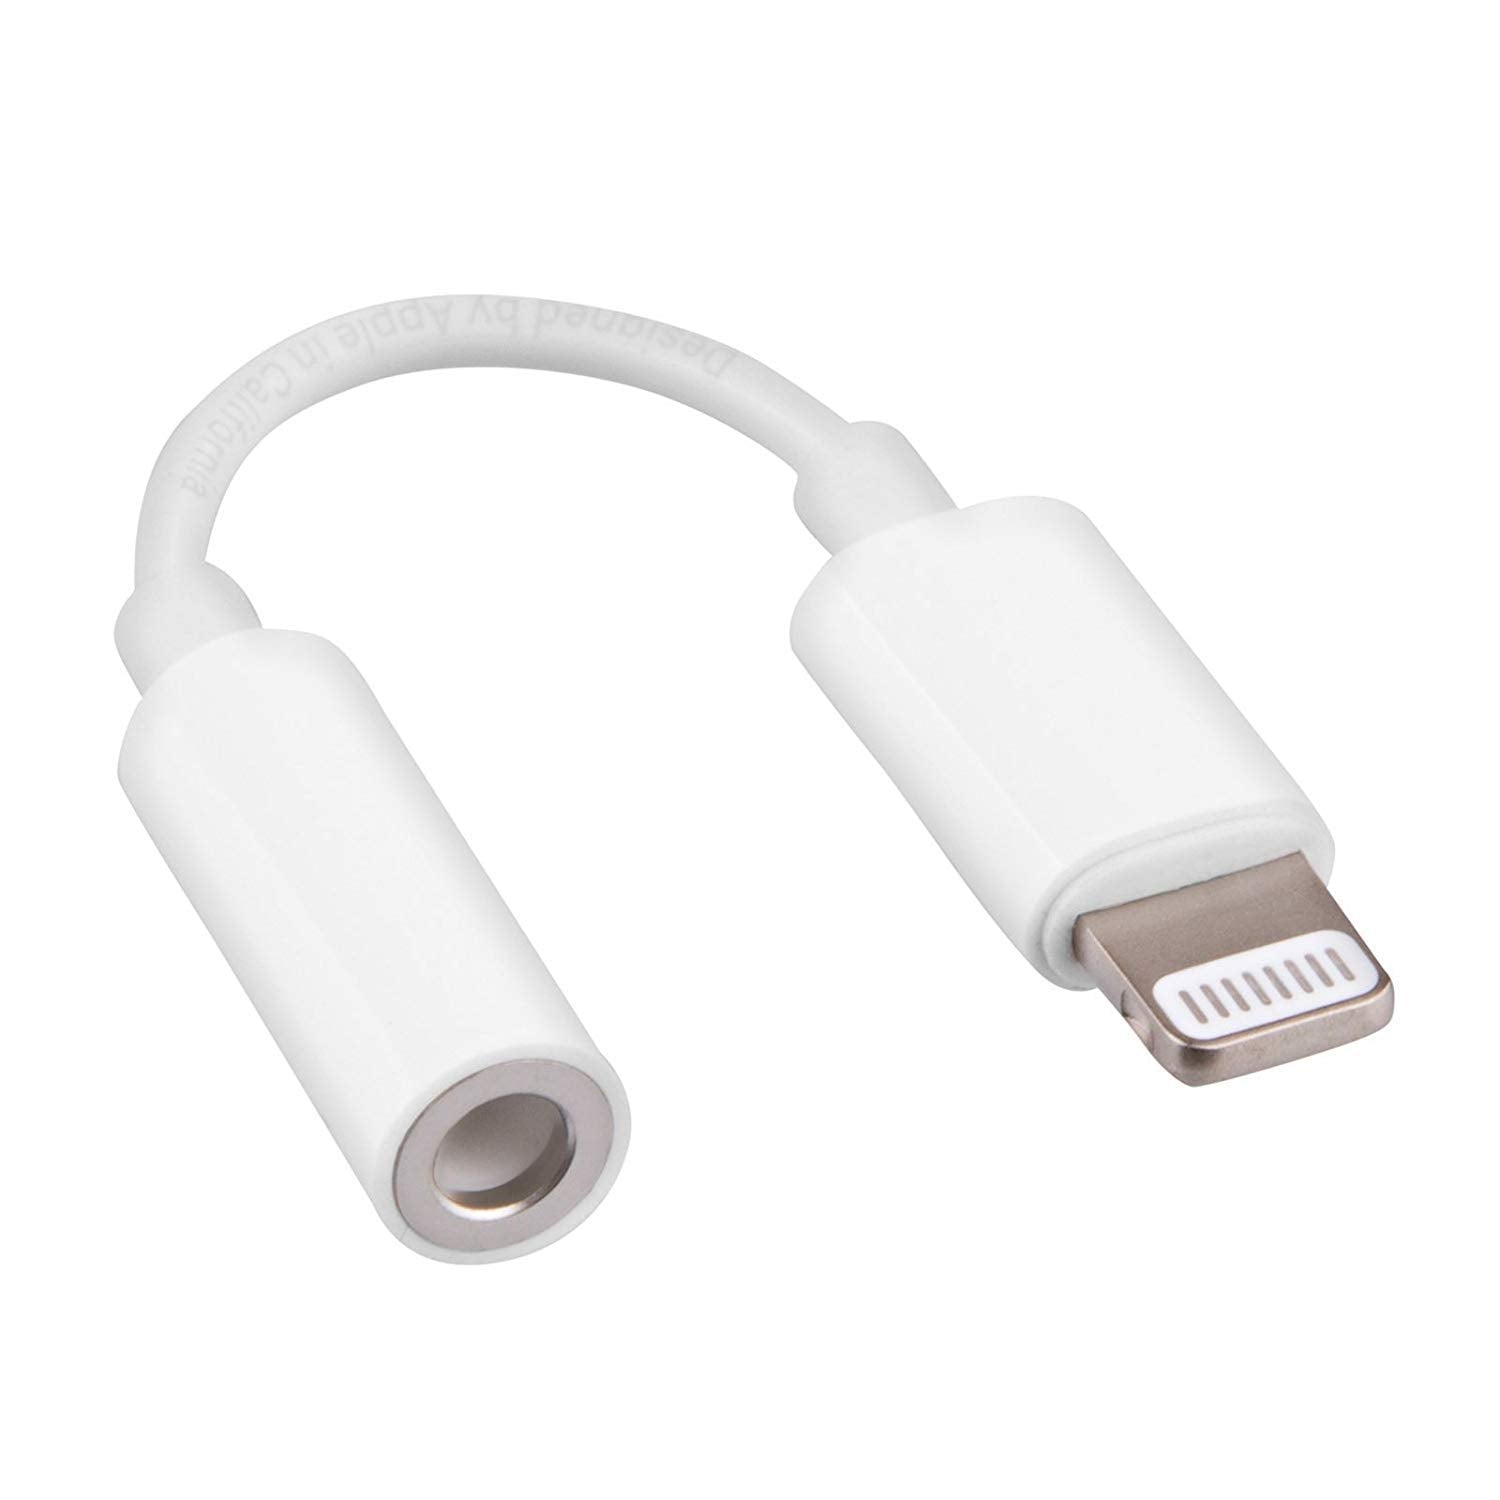 Apple iPhone 6S Plus Heaphone Jack Connector (Lightning to 3.5mm)